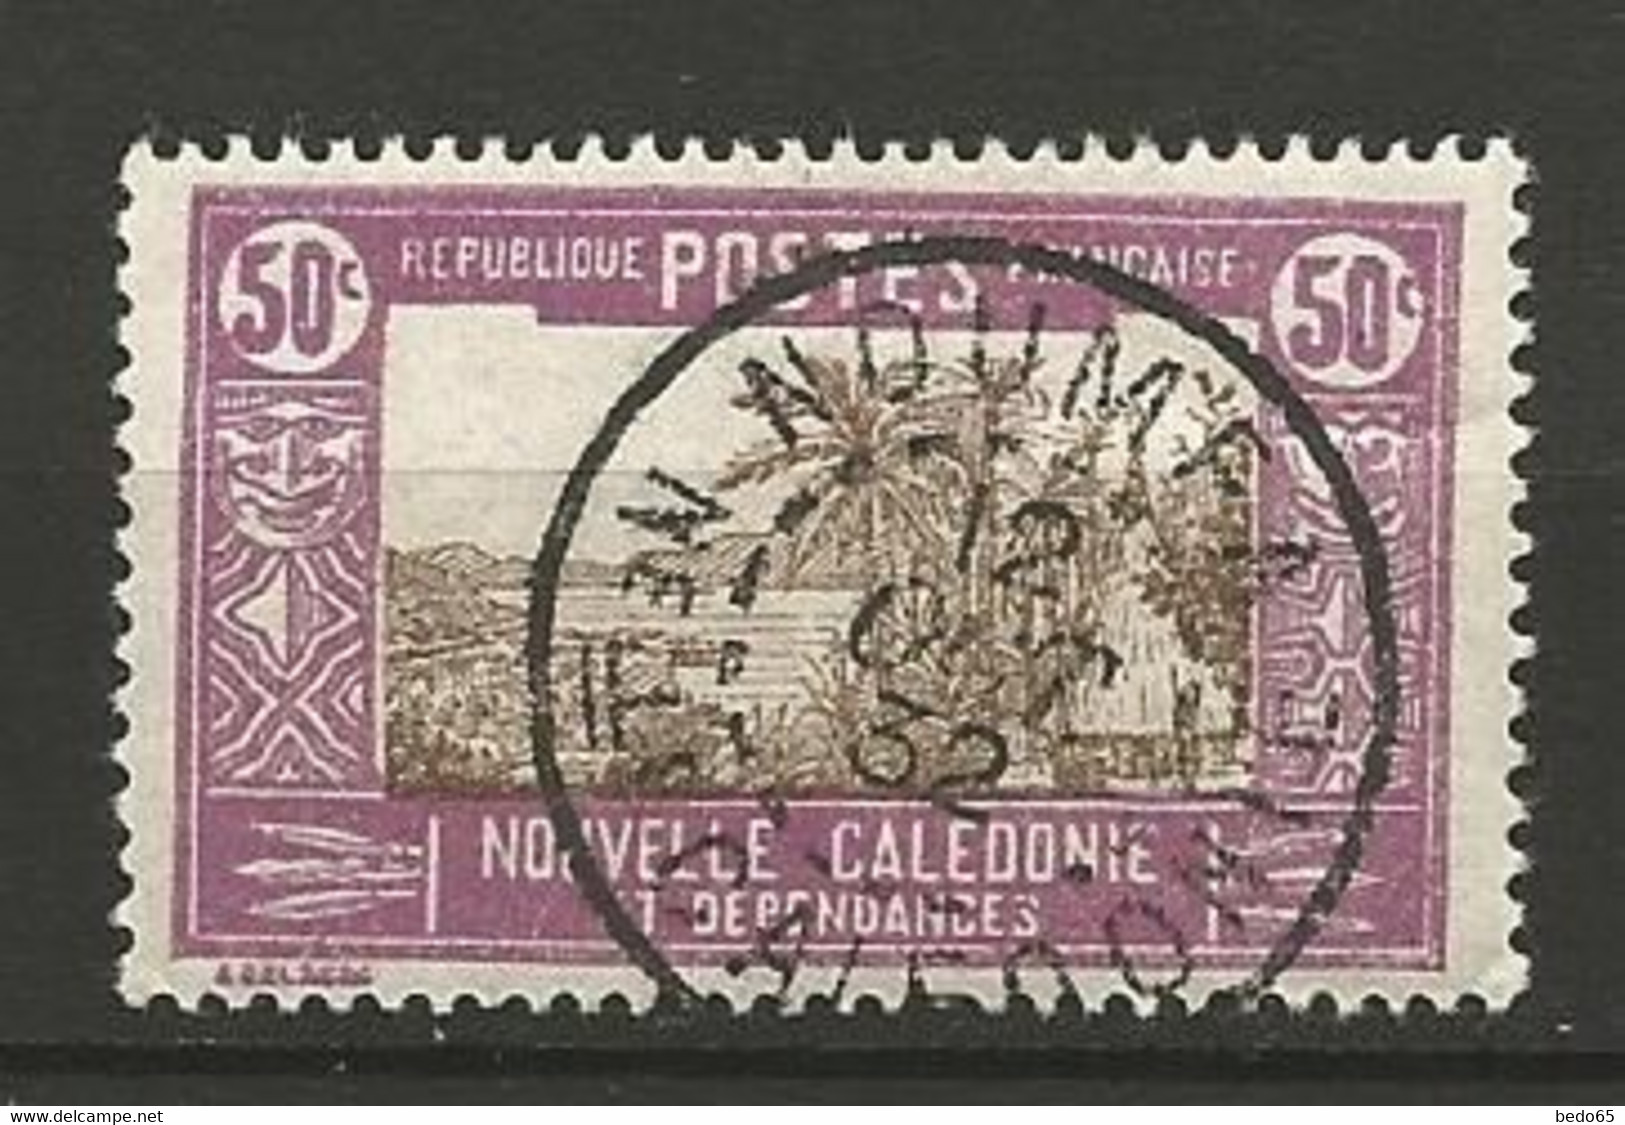 NOUVELLE CALEDONIE N° 150 CACHET NOUMEA - Used Stamps